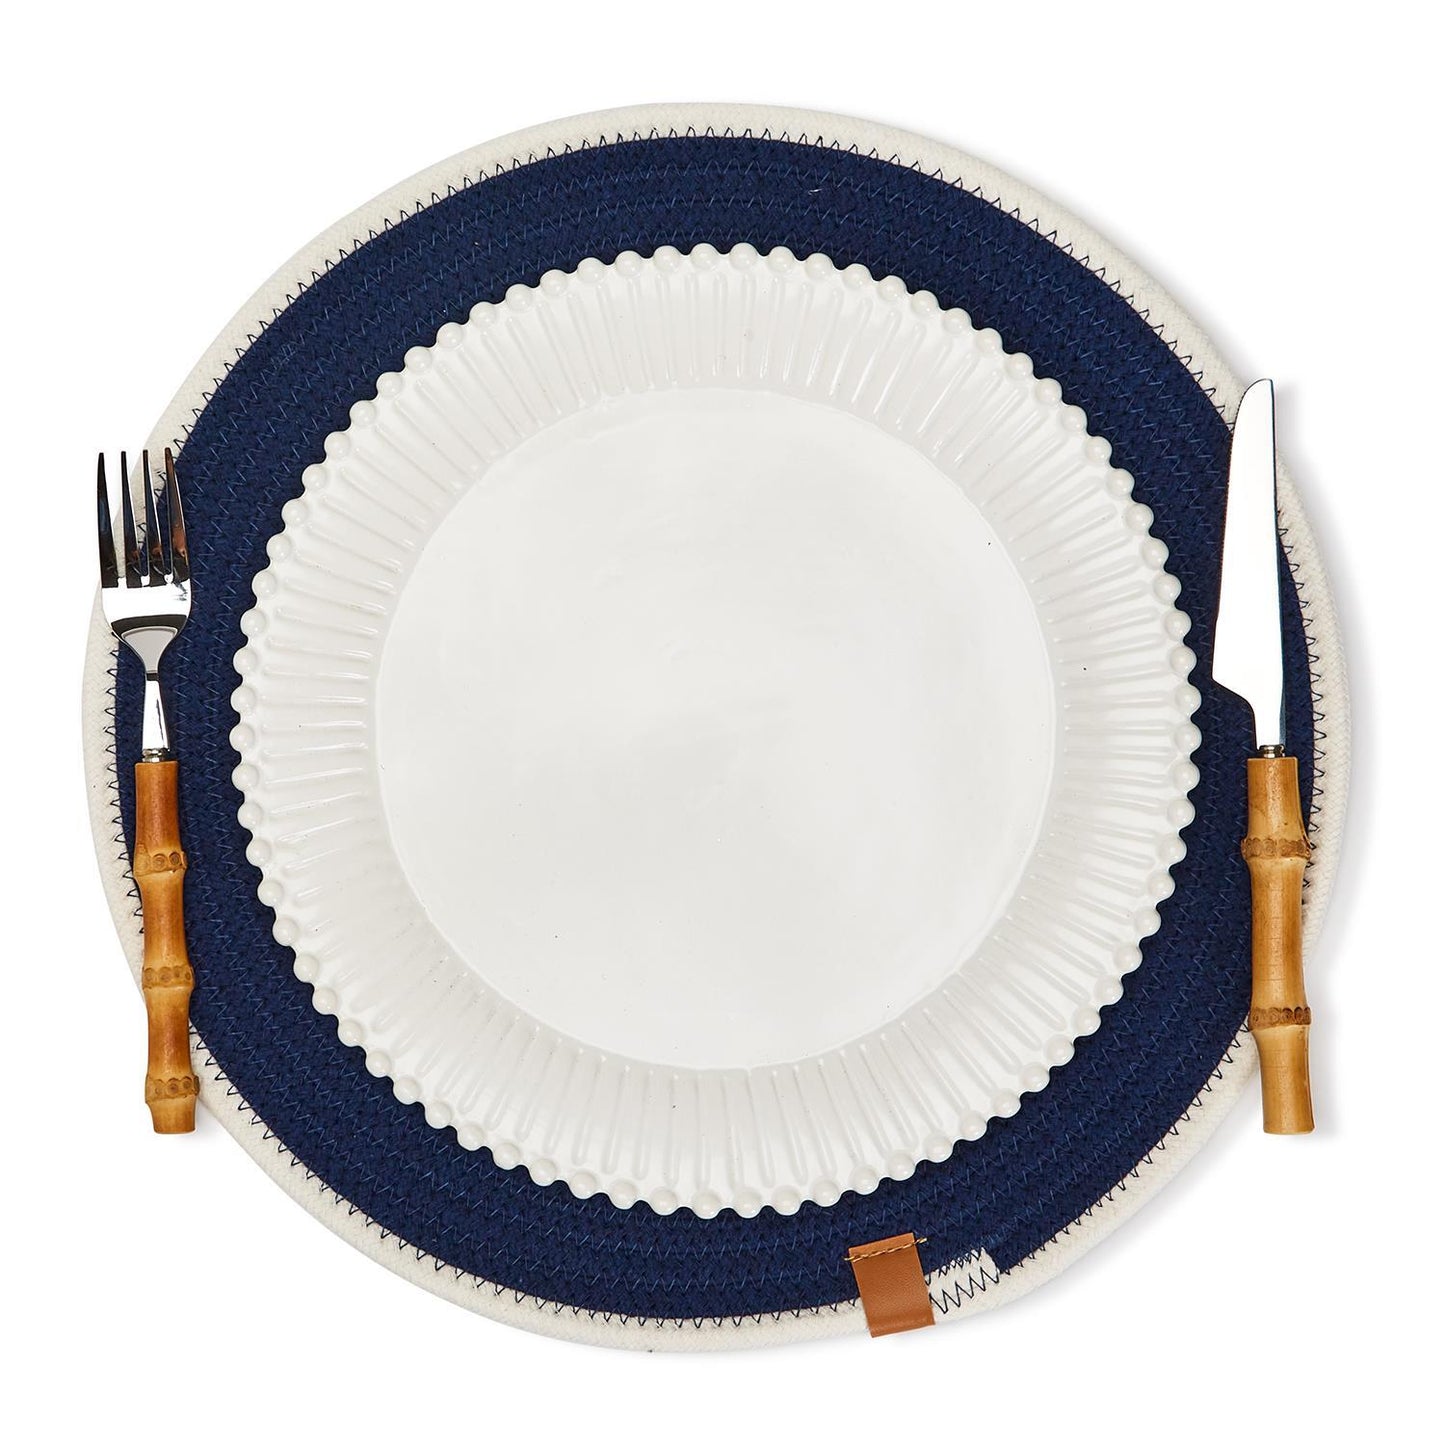 NAVY ROPE PLACEMATS